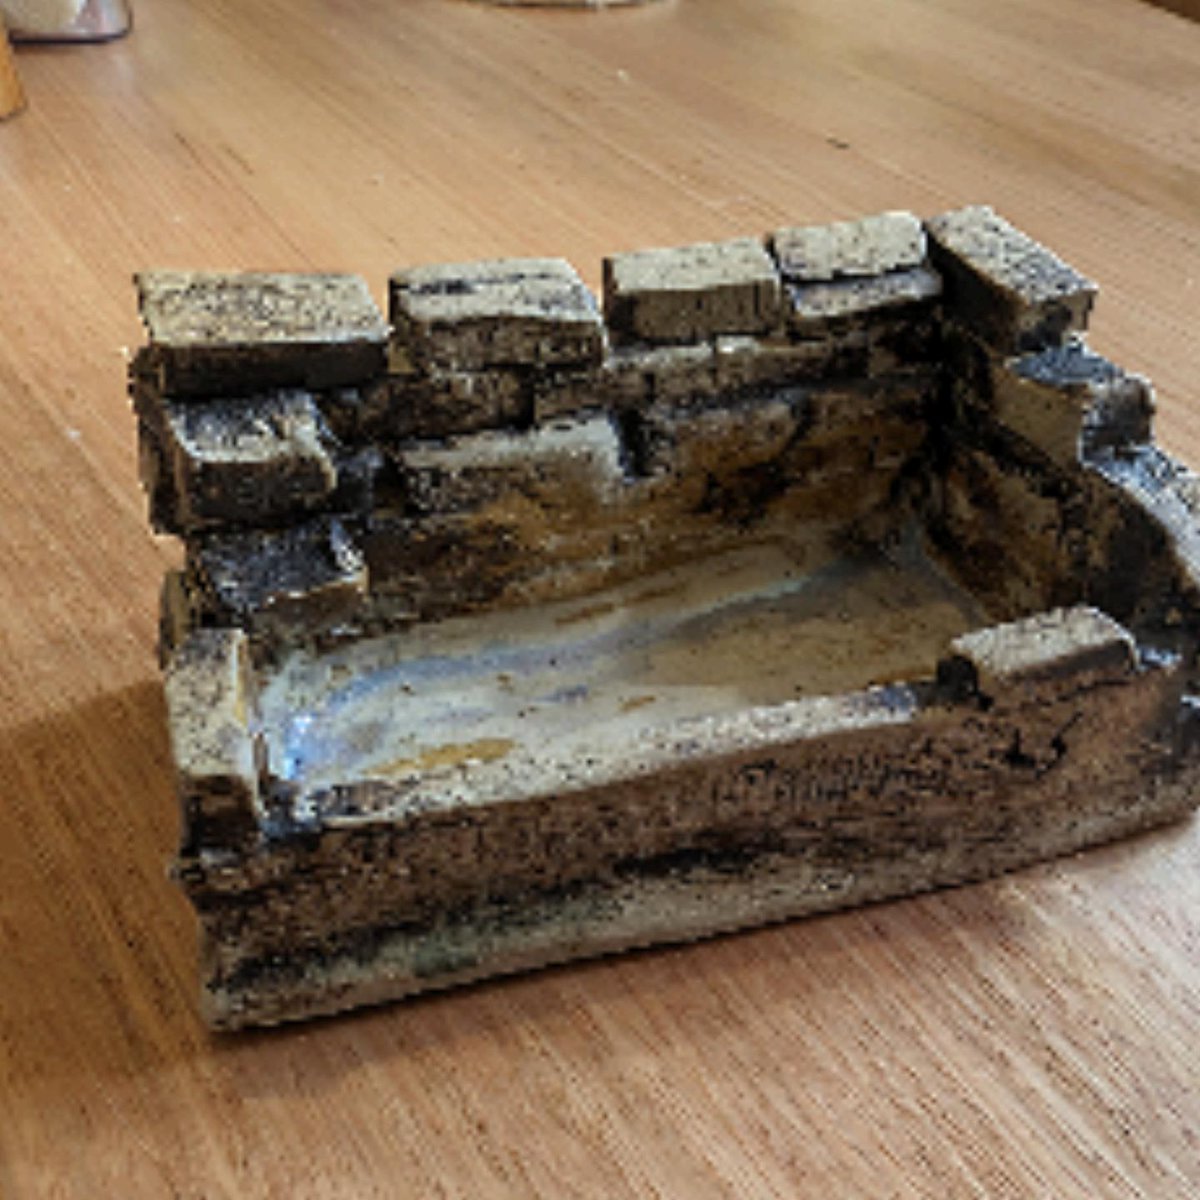 So at pottery I had this idea to make a little tray and build up an old looking brick wall to grow wheatgrass or whatever microgreens. I figure it might look cool like grass is growing through ruins. I loaded it up yesterday so we'll see if it works out.